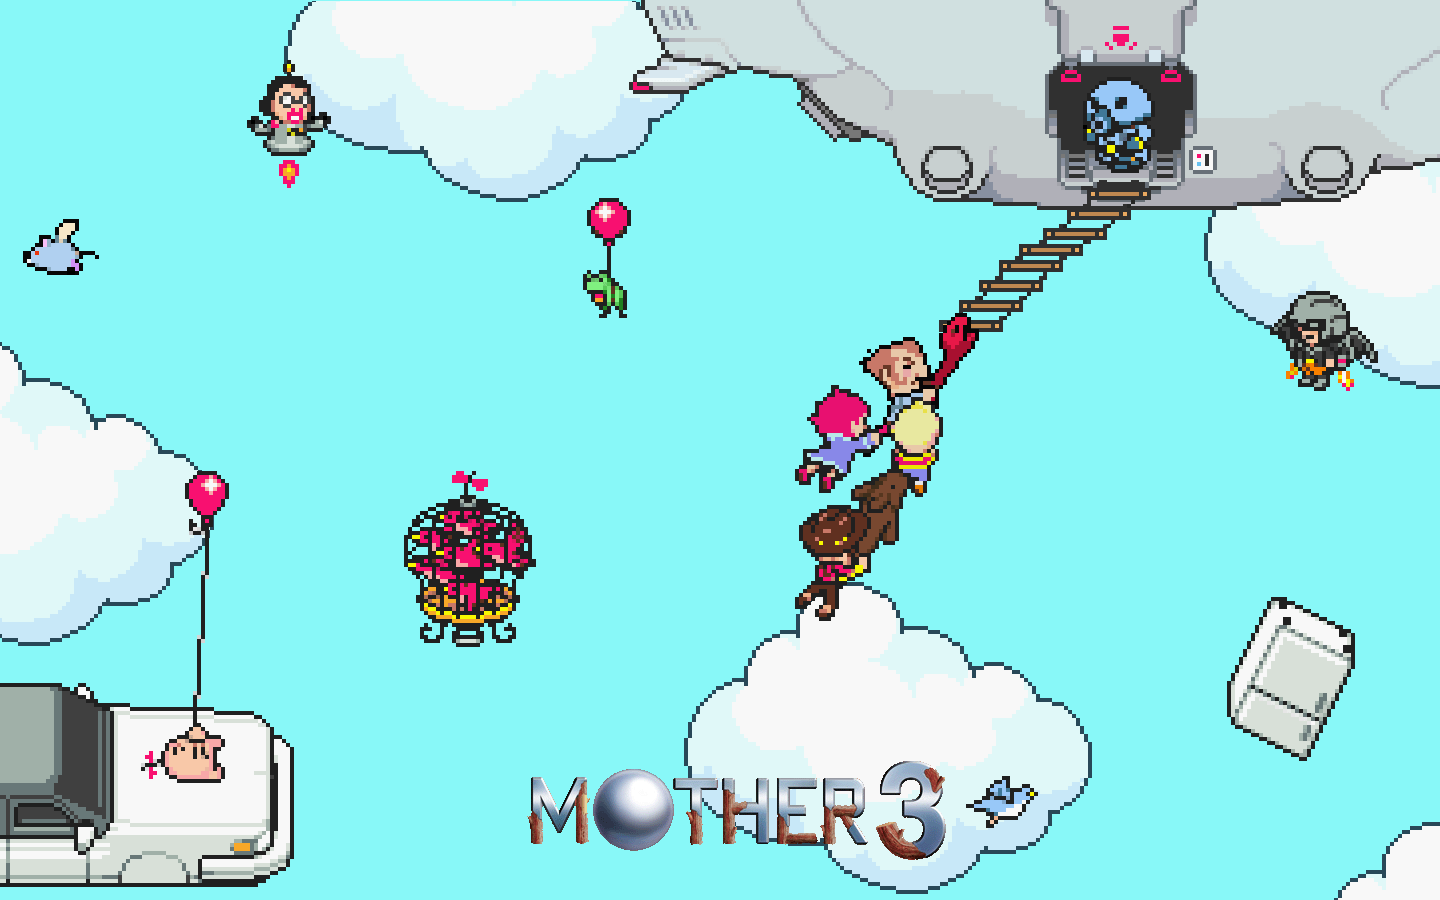 Cool MOTHER 3 Wallpaper  EarthBound Amino